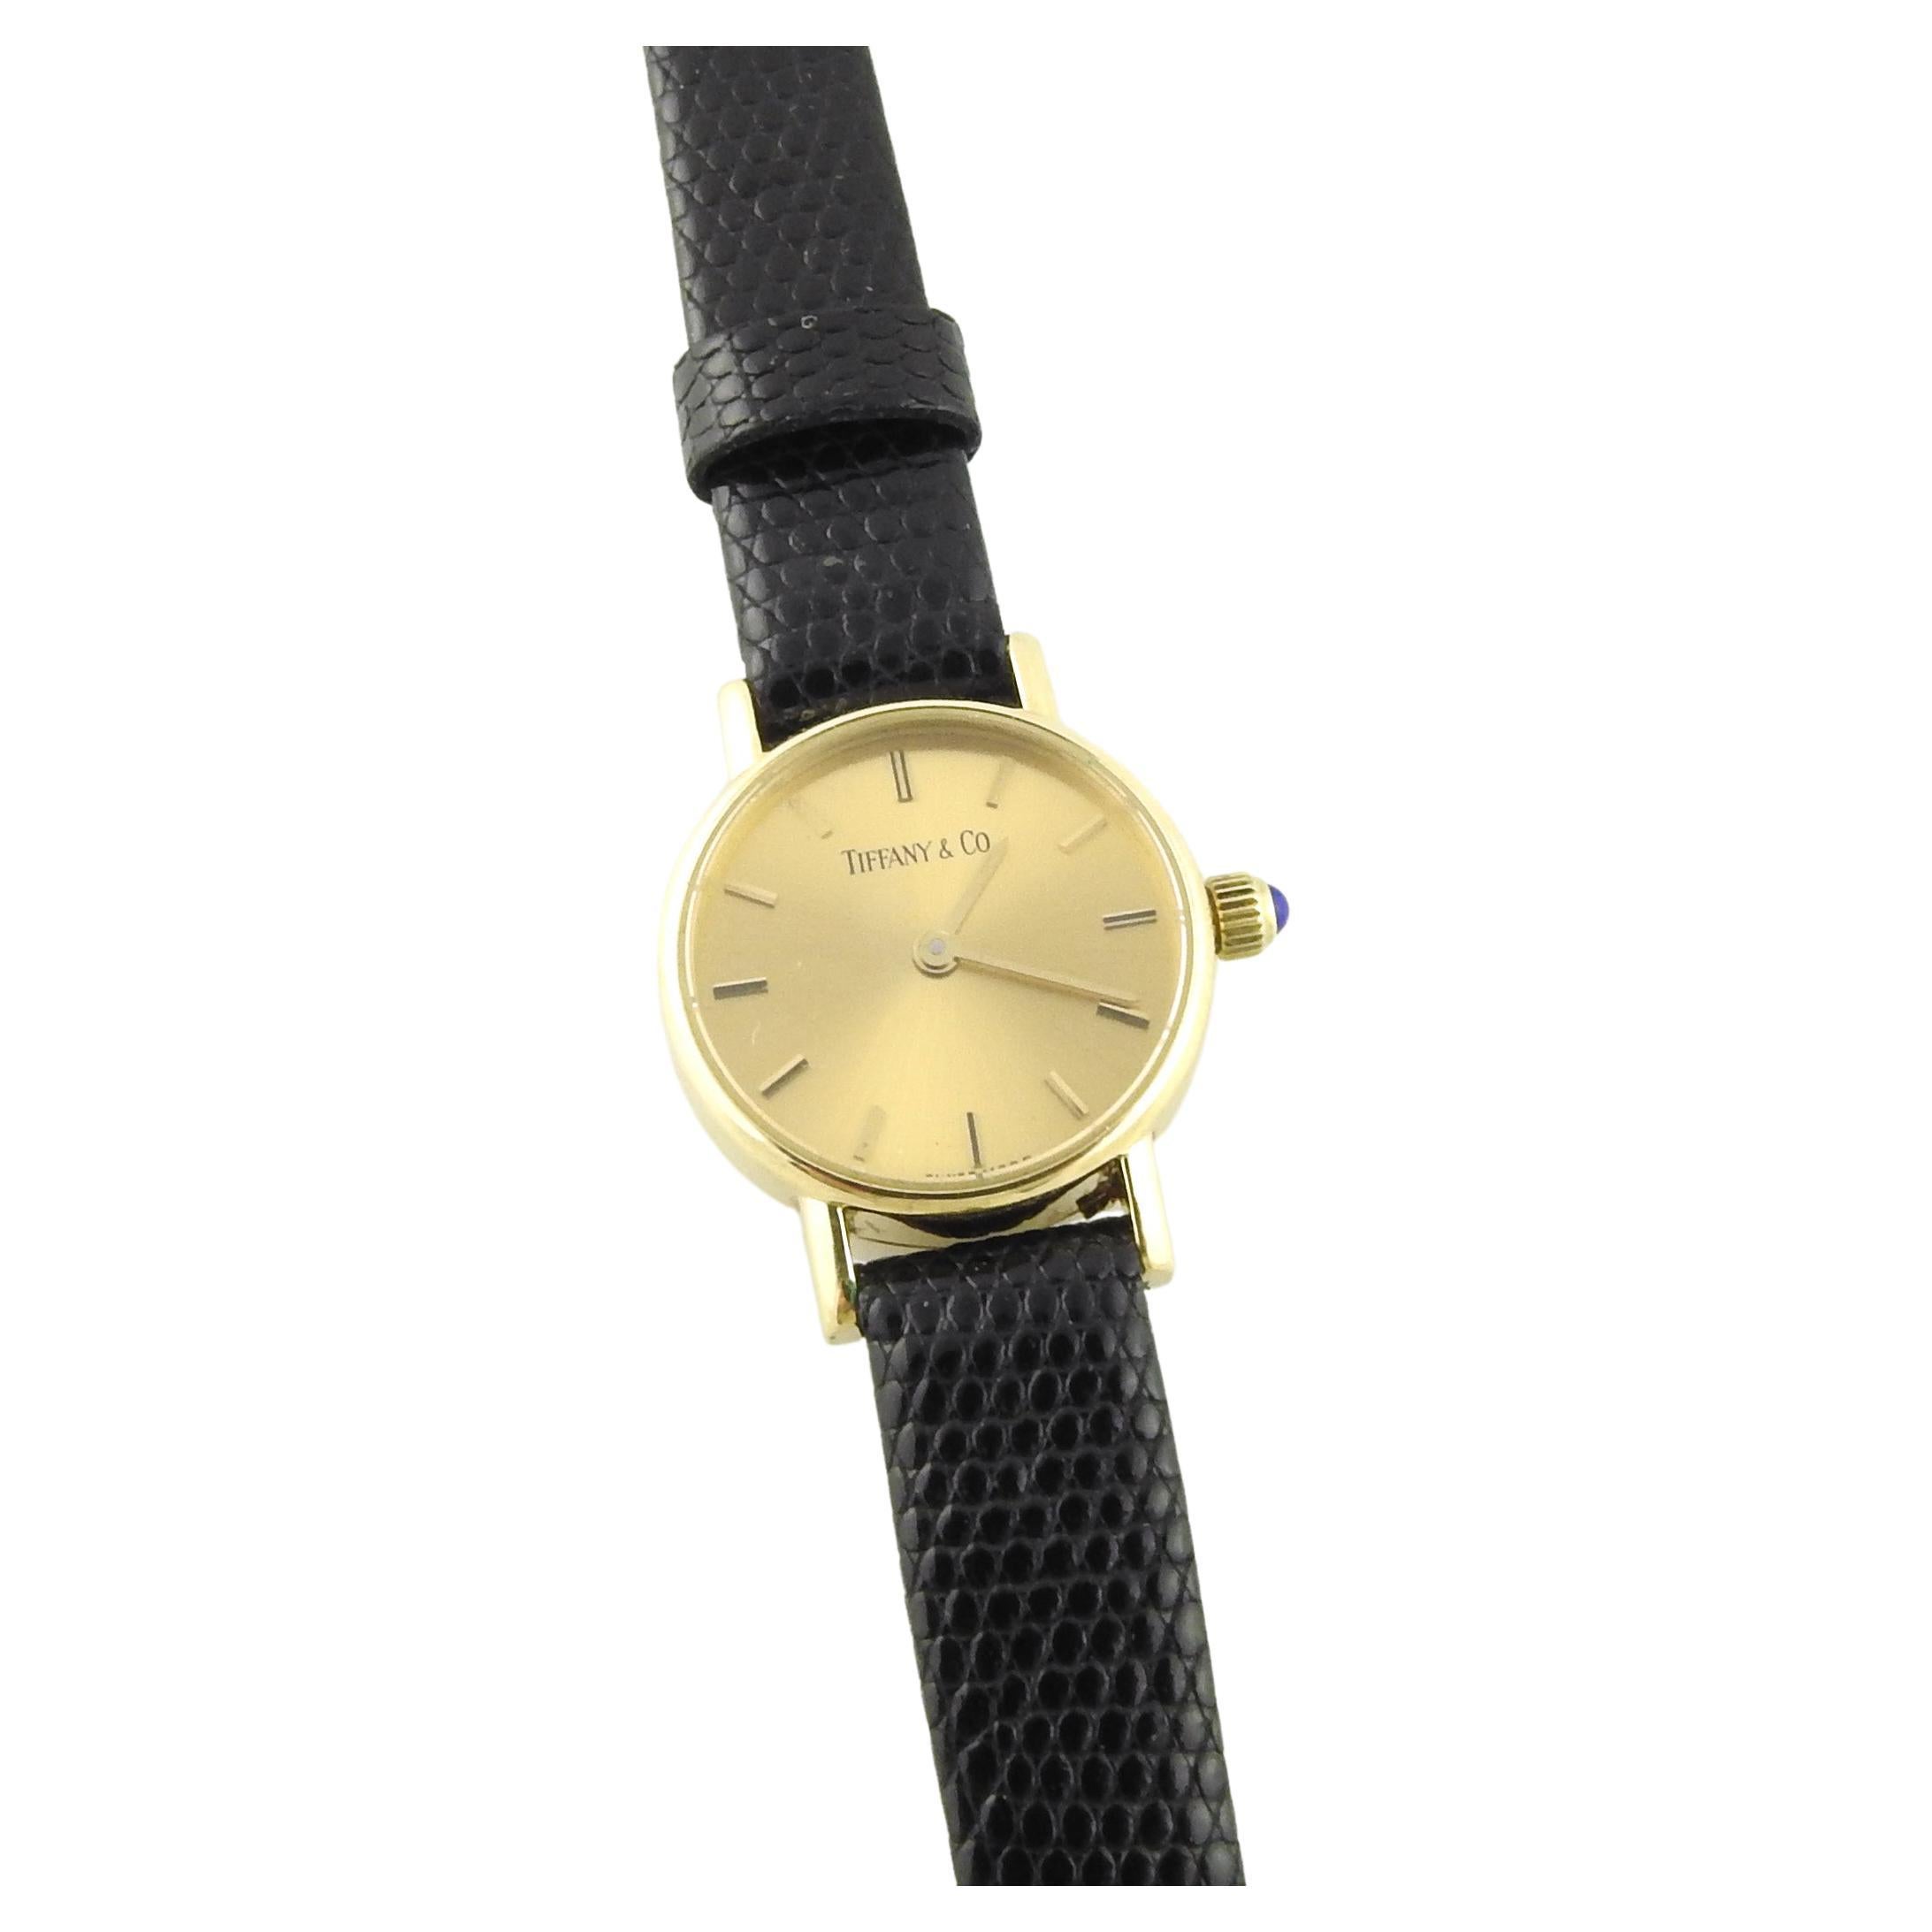 Vintage Tiffany & Co. 14K Yellow Gold Petite Ladies Watch Gold Dial Black Band